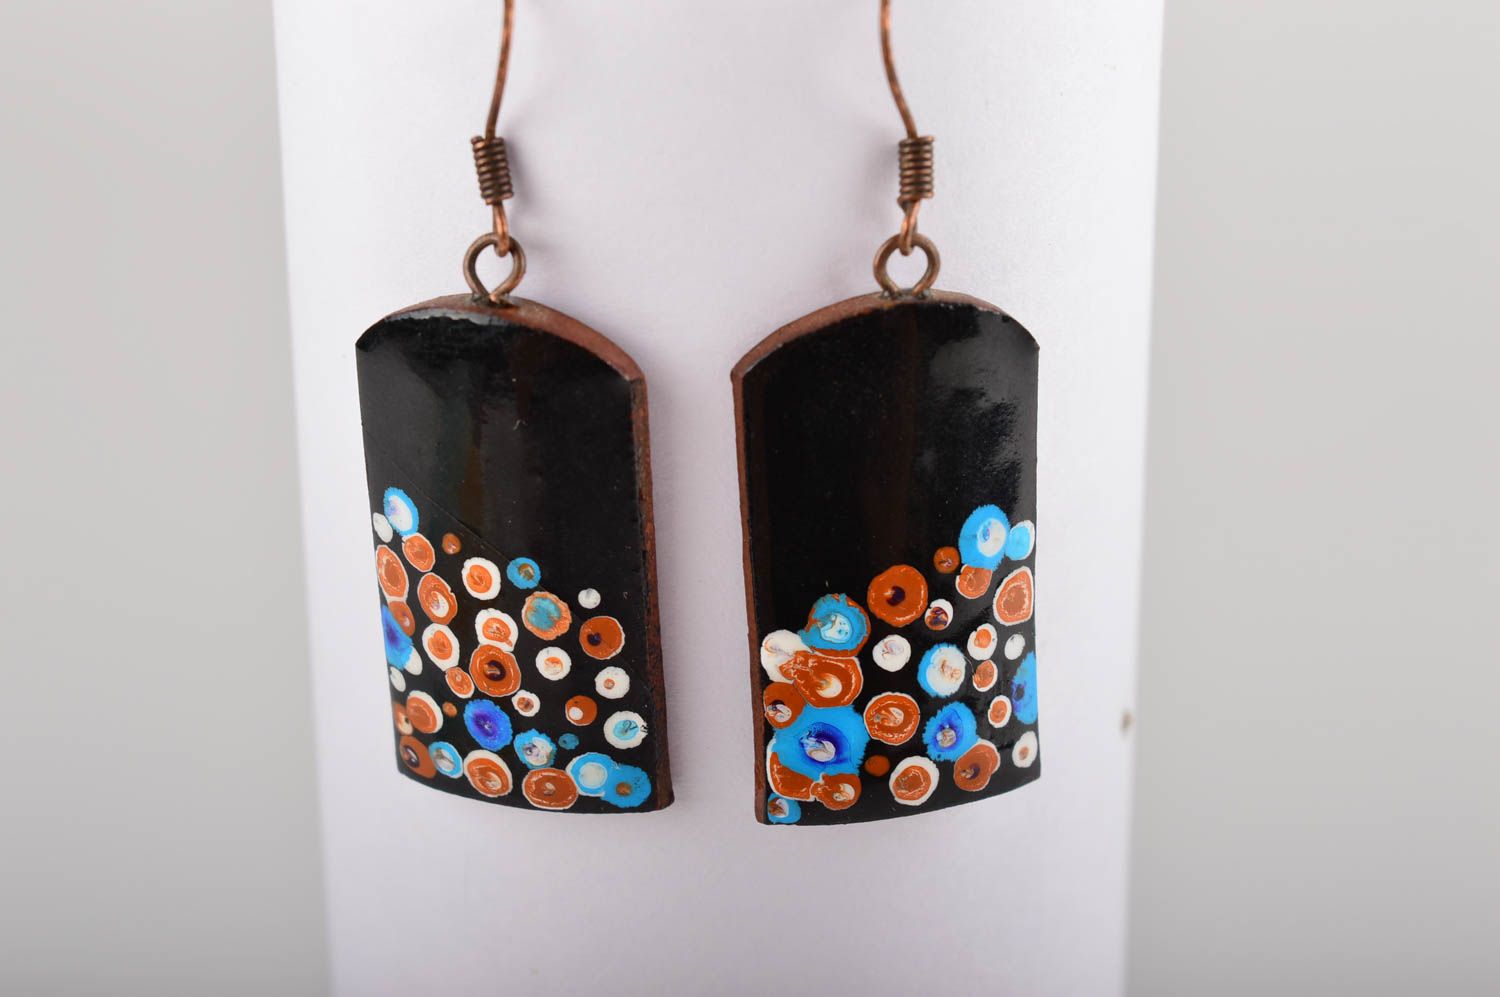 Handmade ceramic earrings fashion earrings designer accessories gifts for her photo 1